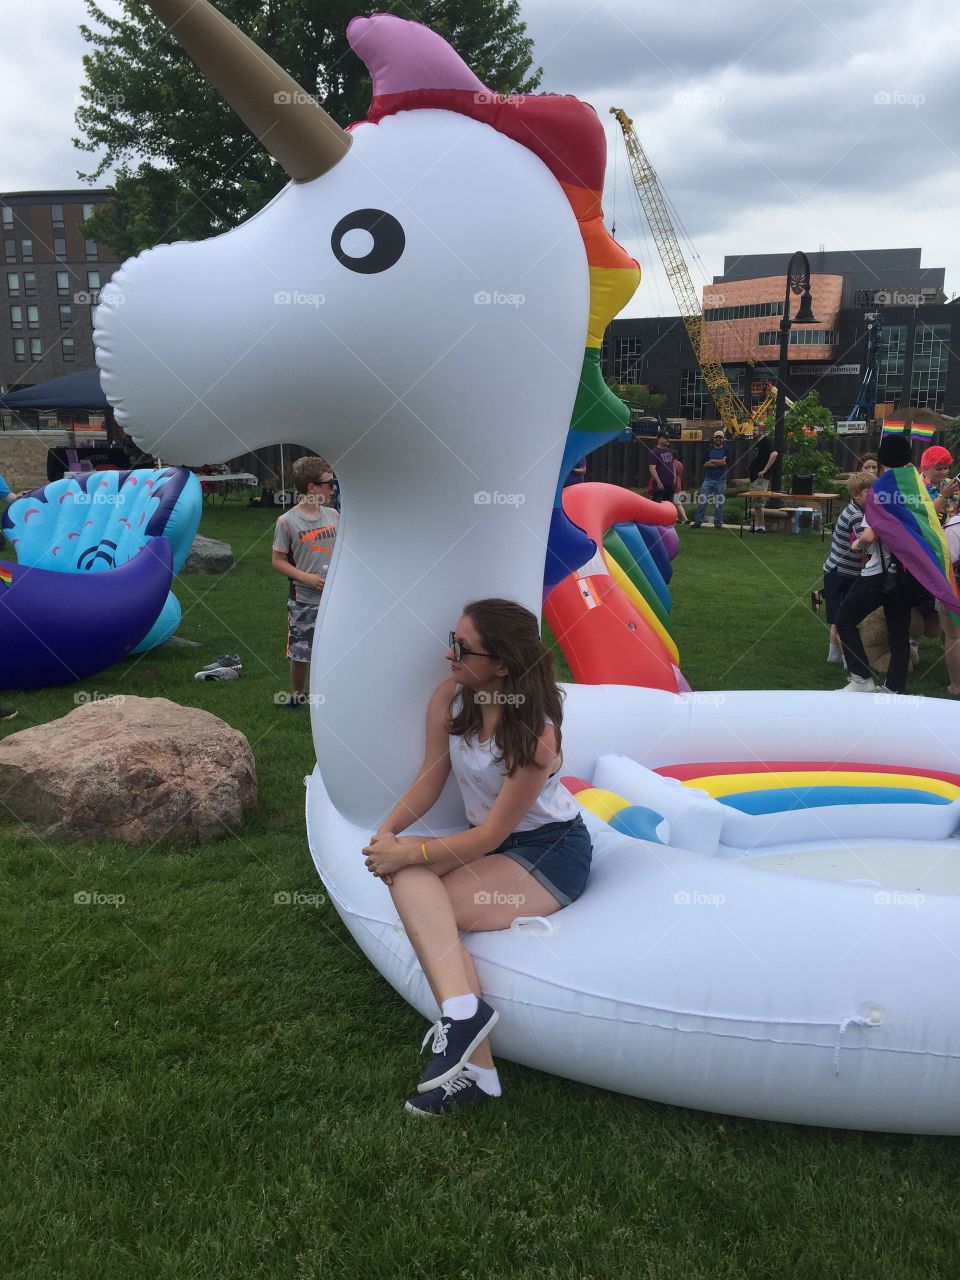 Just me, and my unicorn 